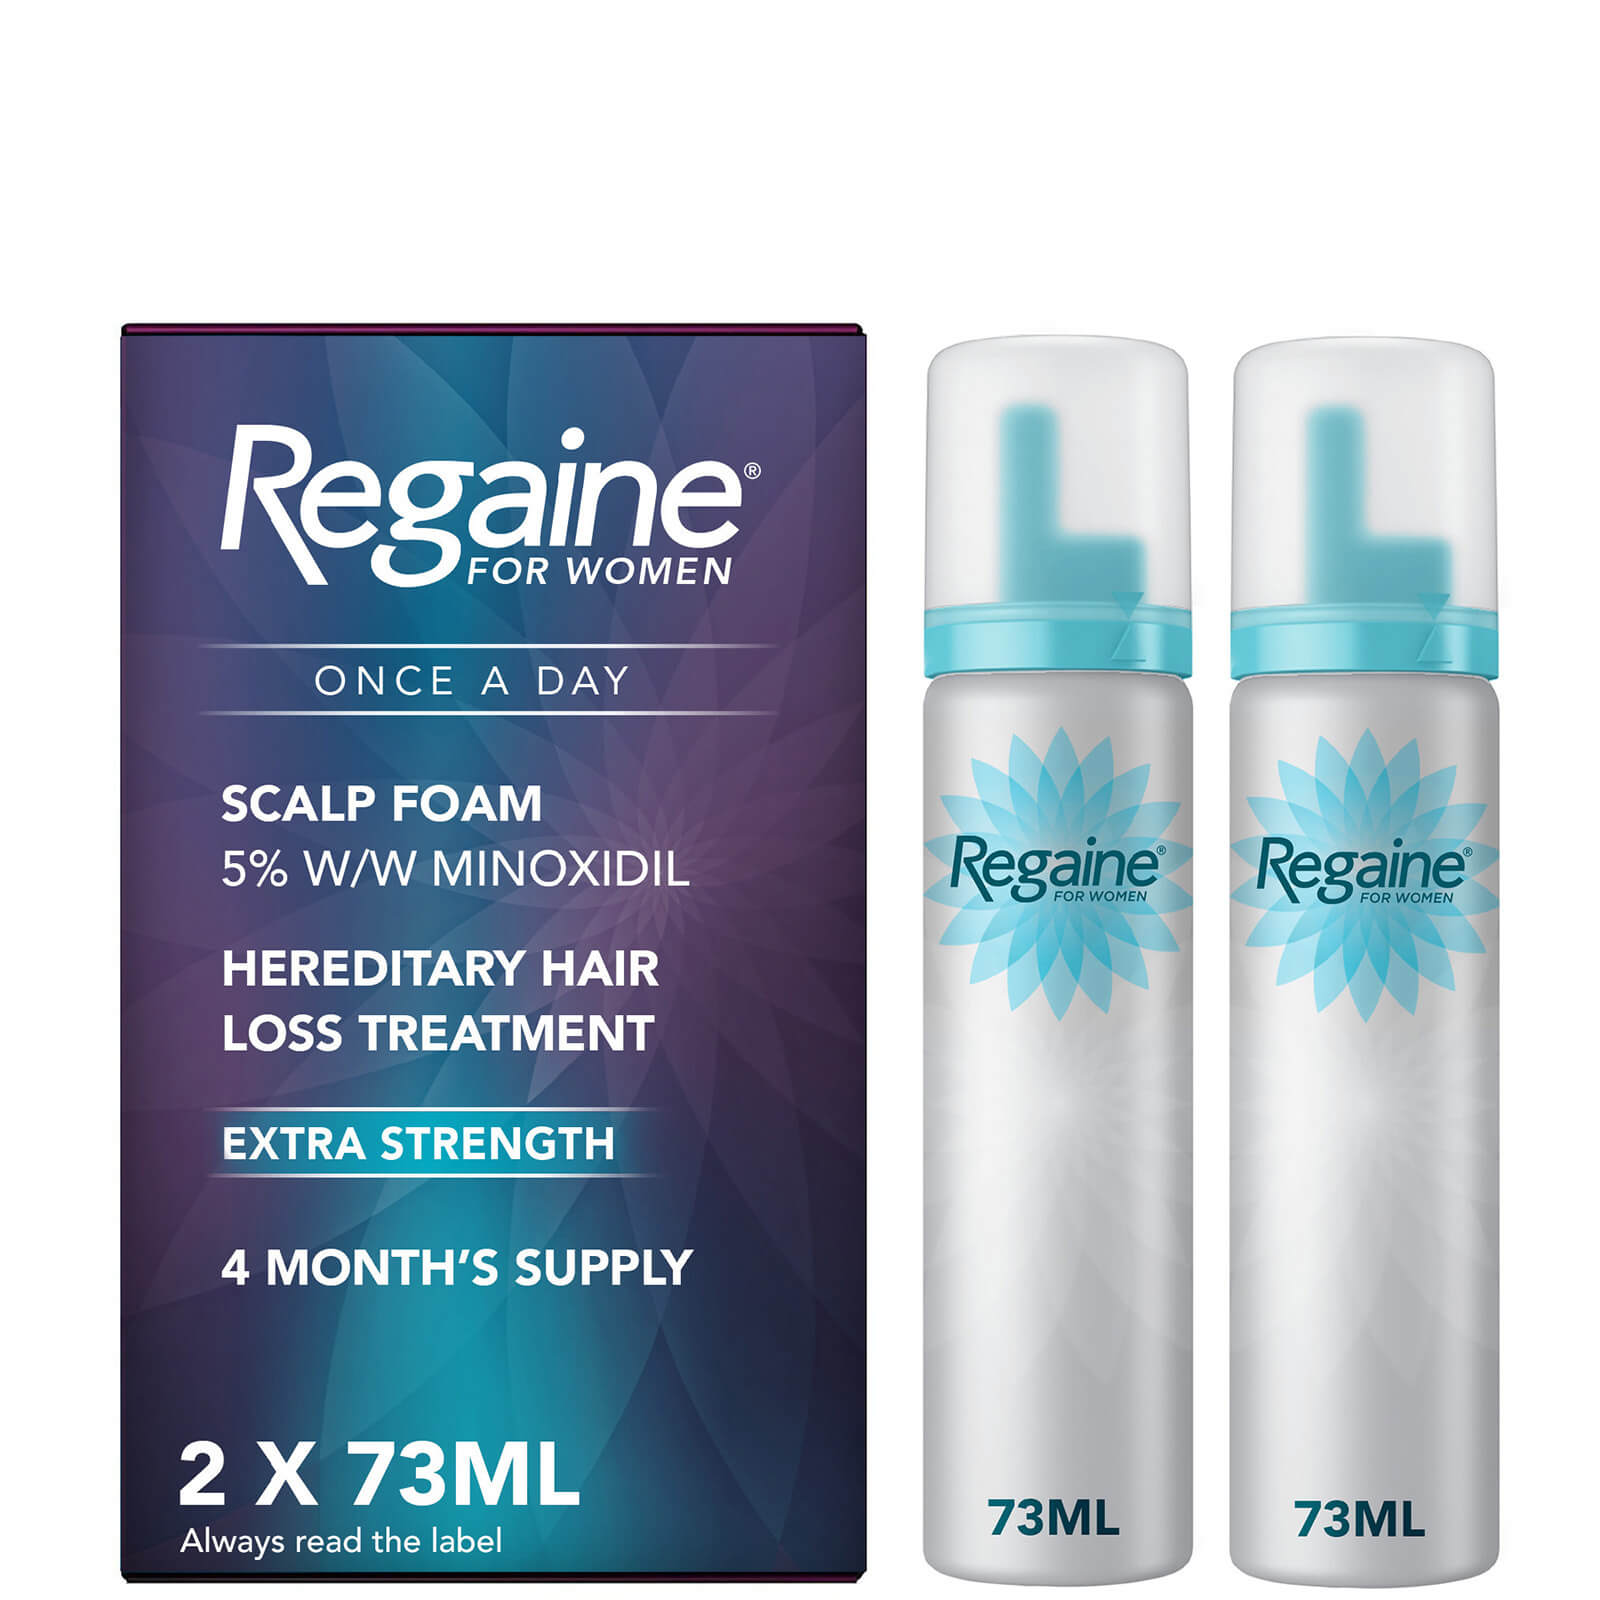 Regaine Women`s Once A Day Hair Loss and Regrowth Scalp Foam Treatment with Minoxidil 2 x 73ml lookfantastic.com imagine